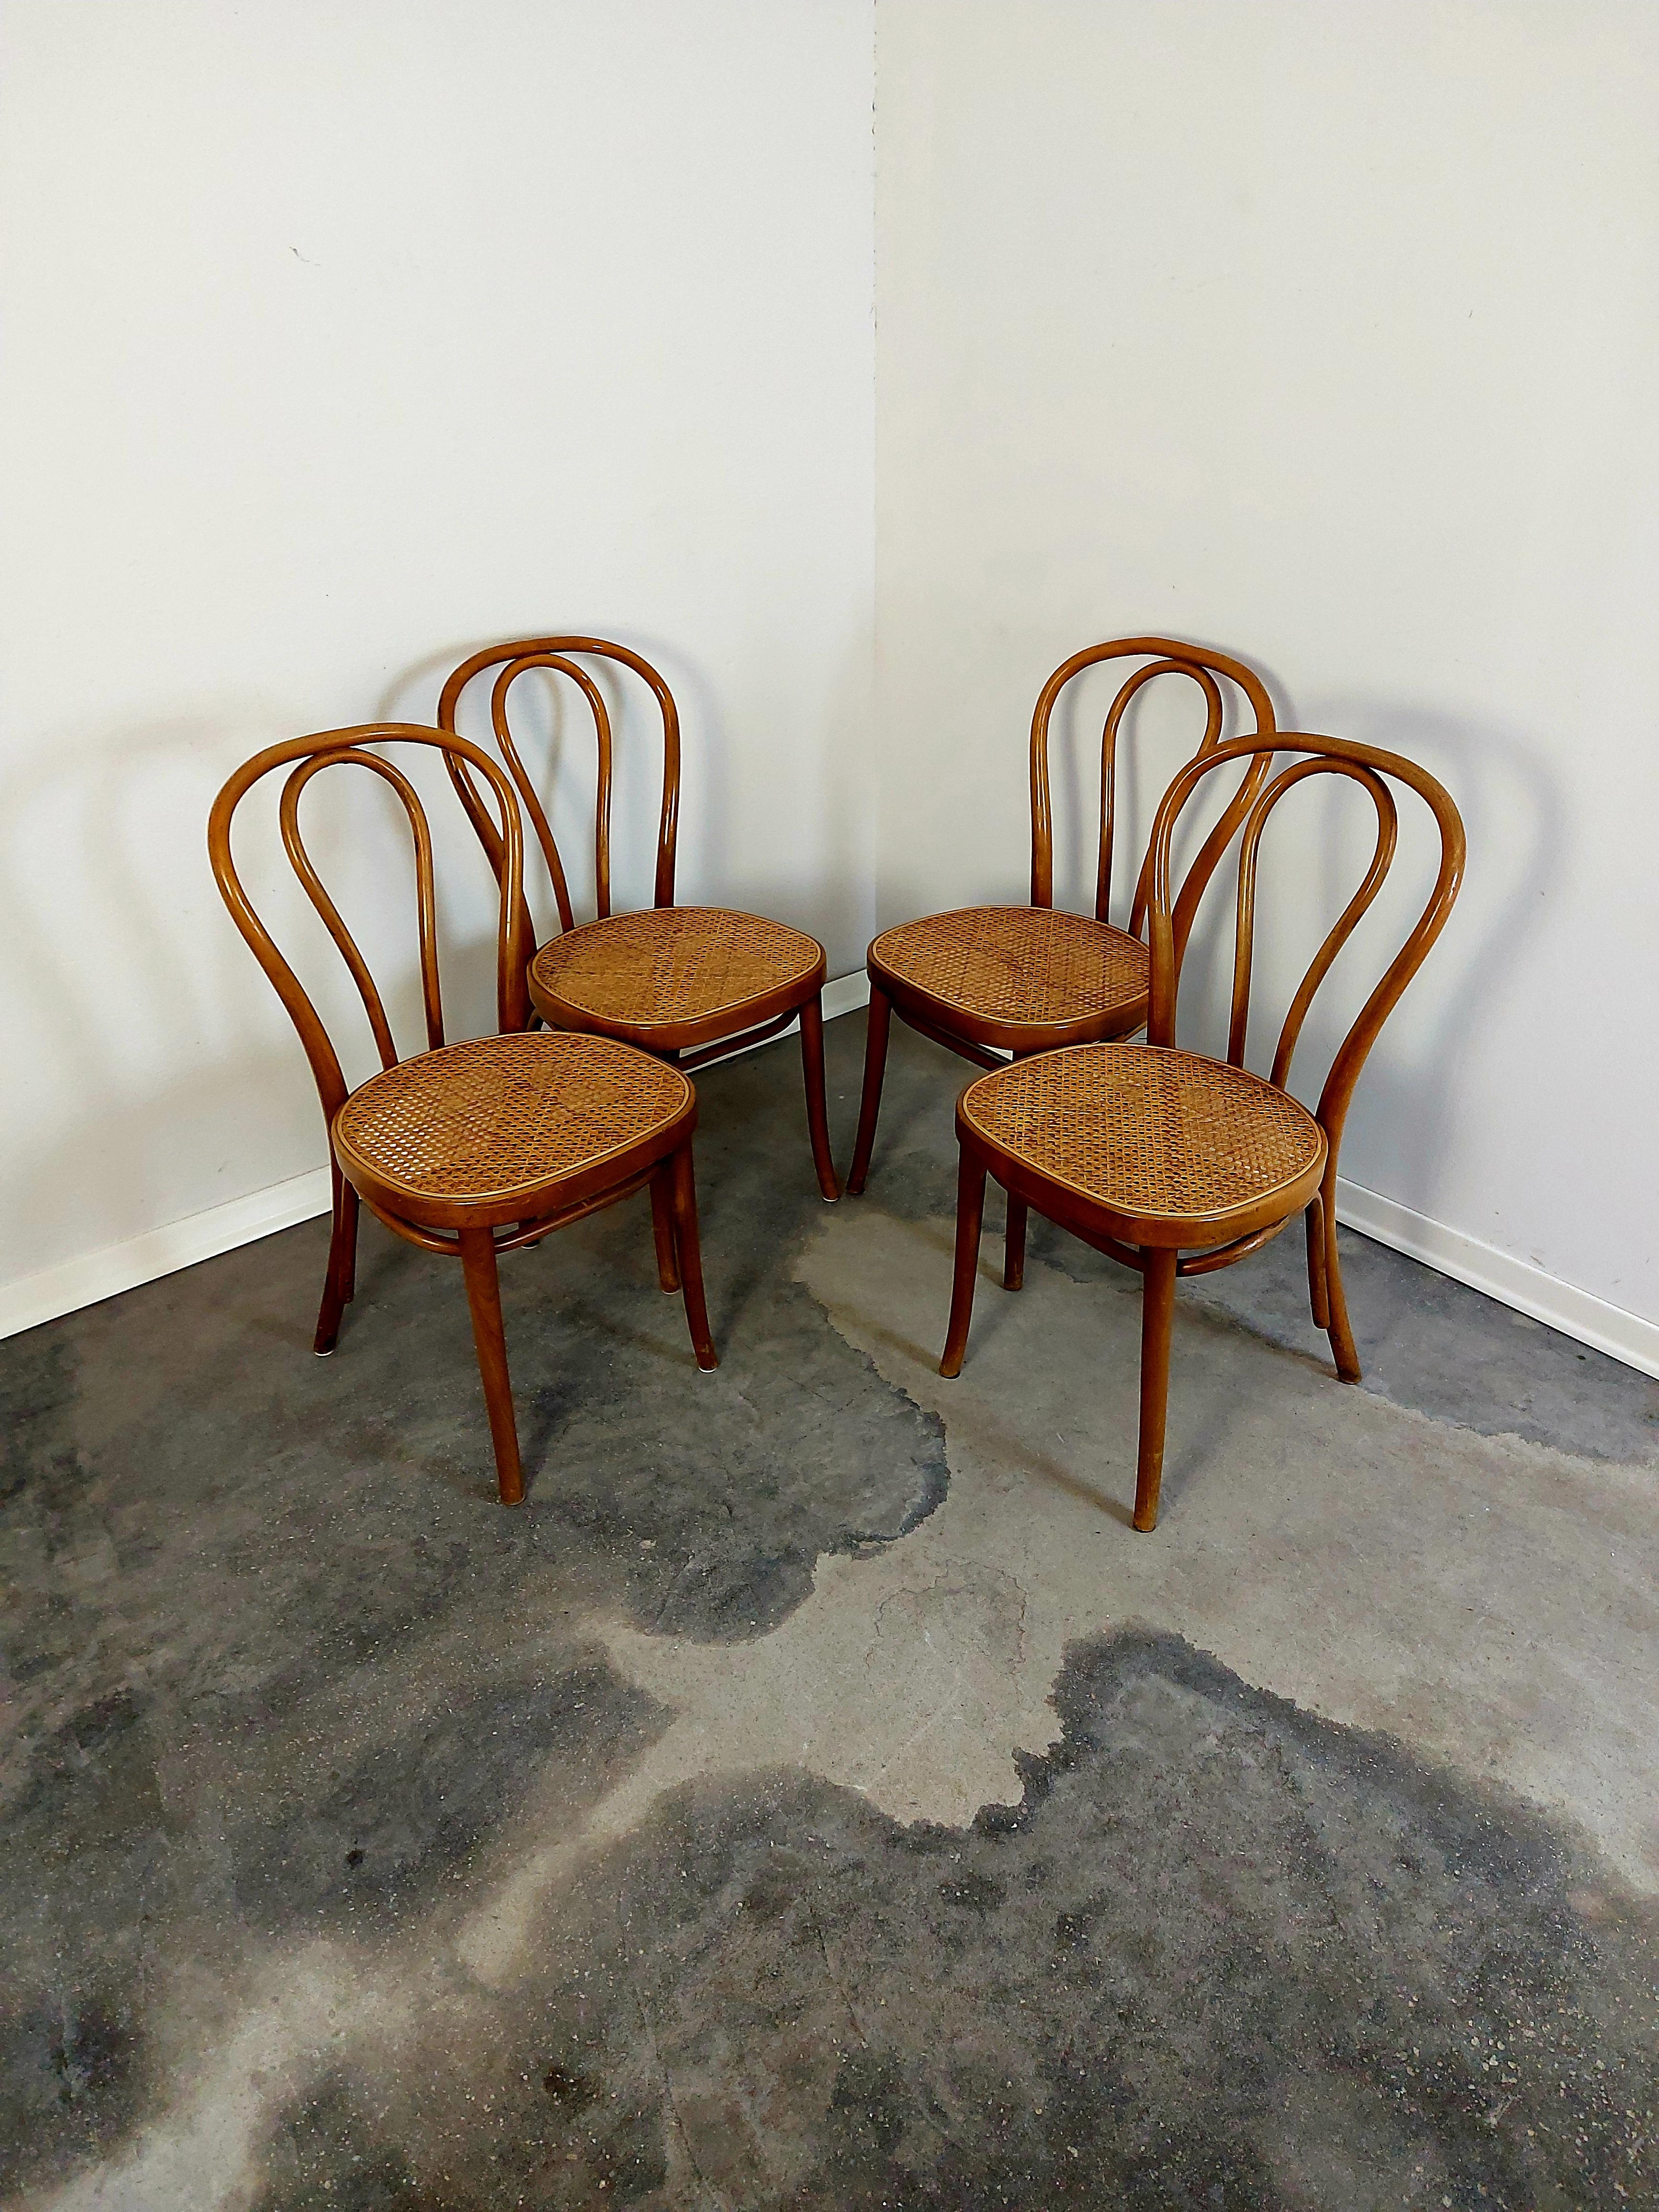 Mid-20th Century 1 of 4, Dining chair, Bentwood cane, No. 18, 1960s